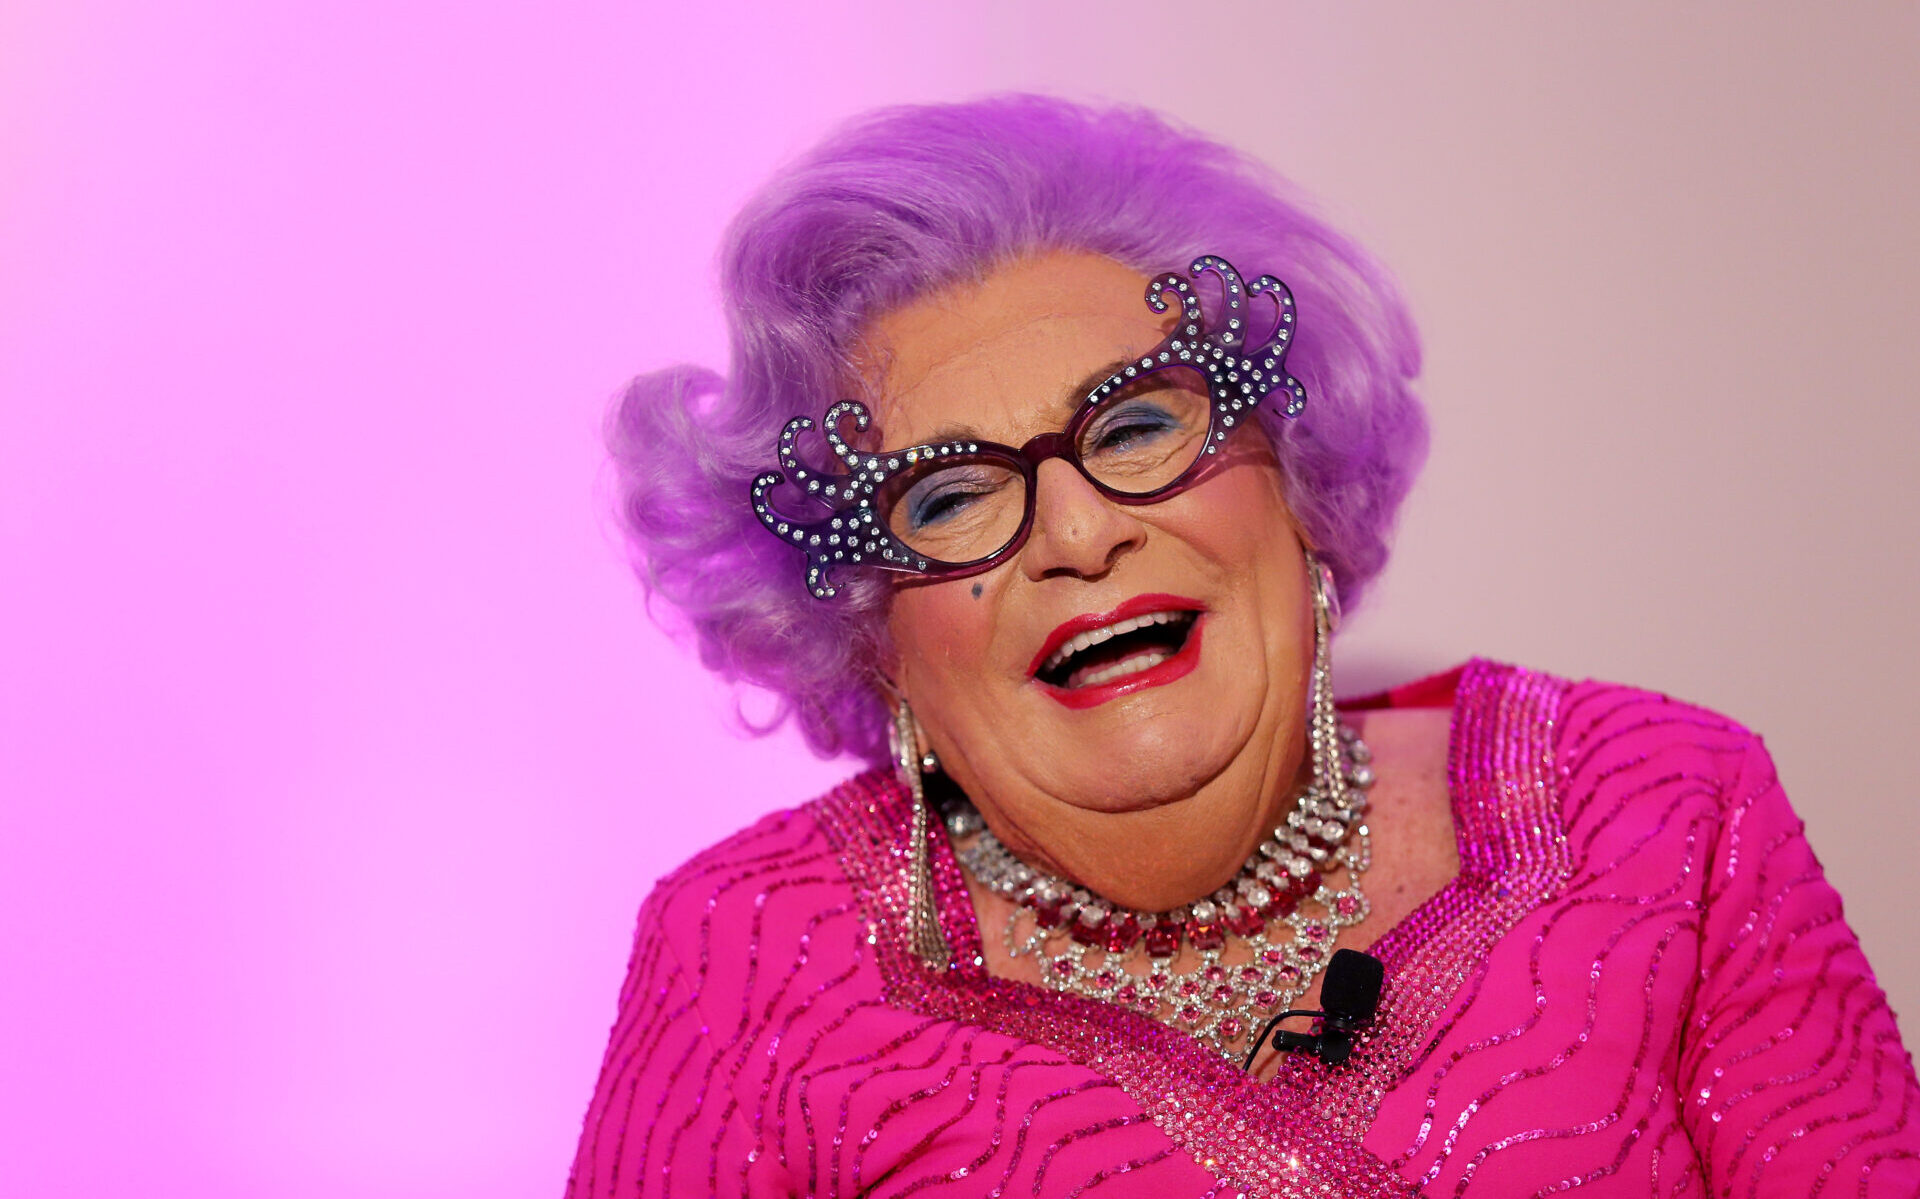 SYDNEY, AUSTRALIA - SEPTEMBER 11: Dame Edna Everage poses during a High Tea launch event at The Langham on September 11, 2019 in Sydney, Australia. (Photo by Don Arnold/WireImage)